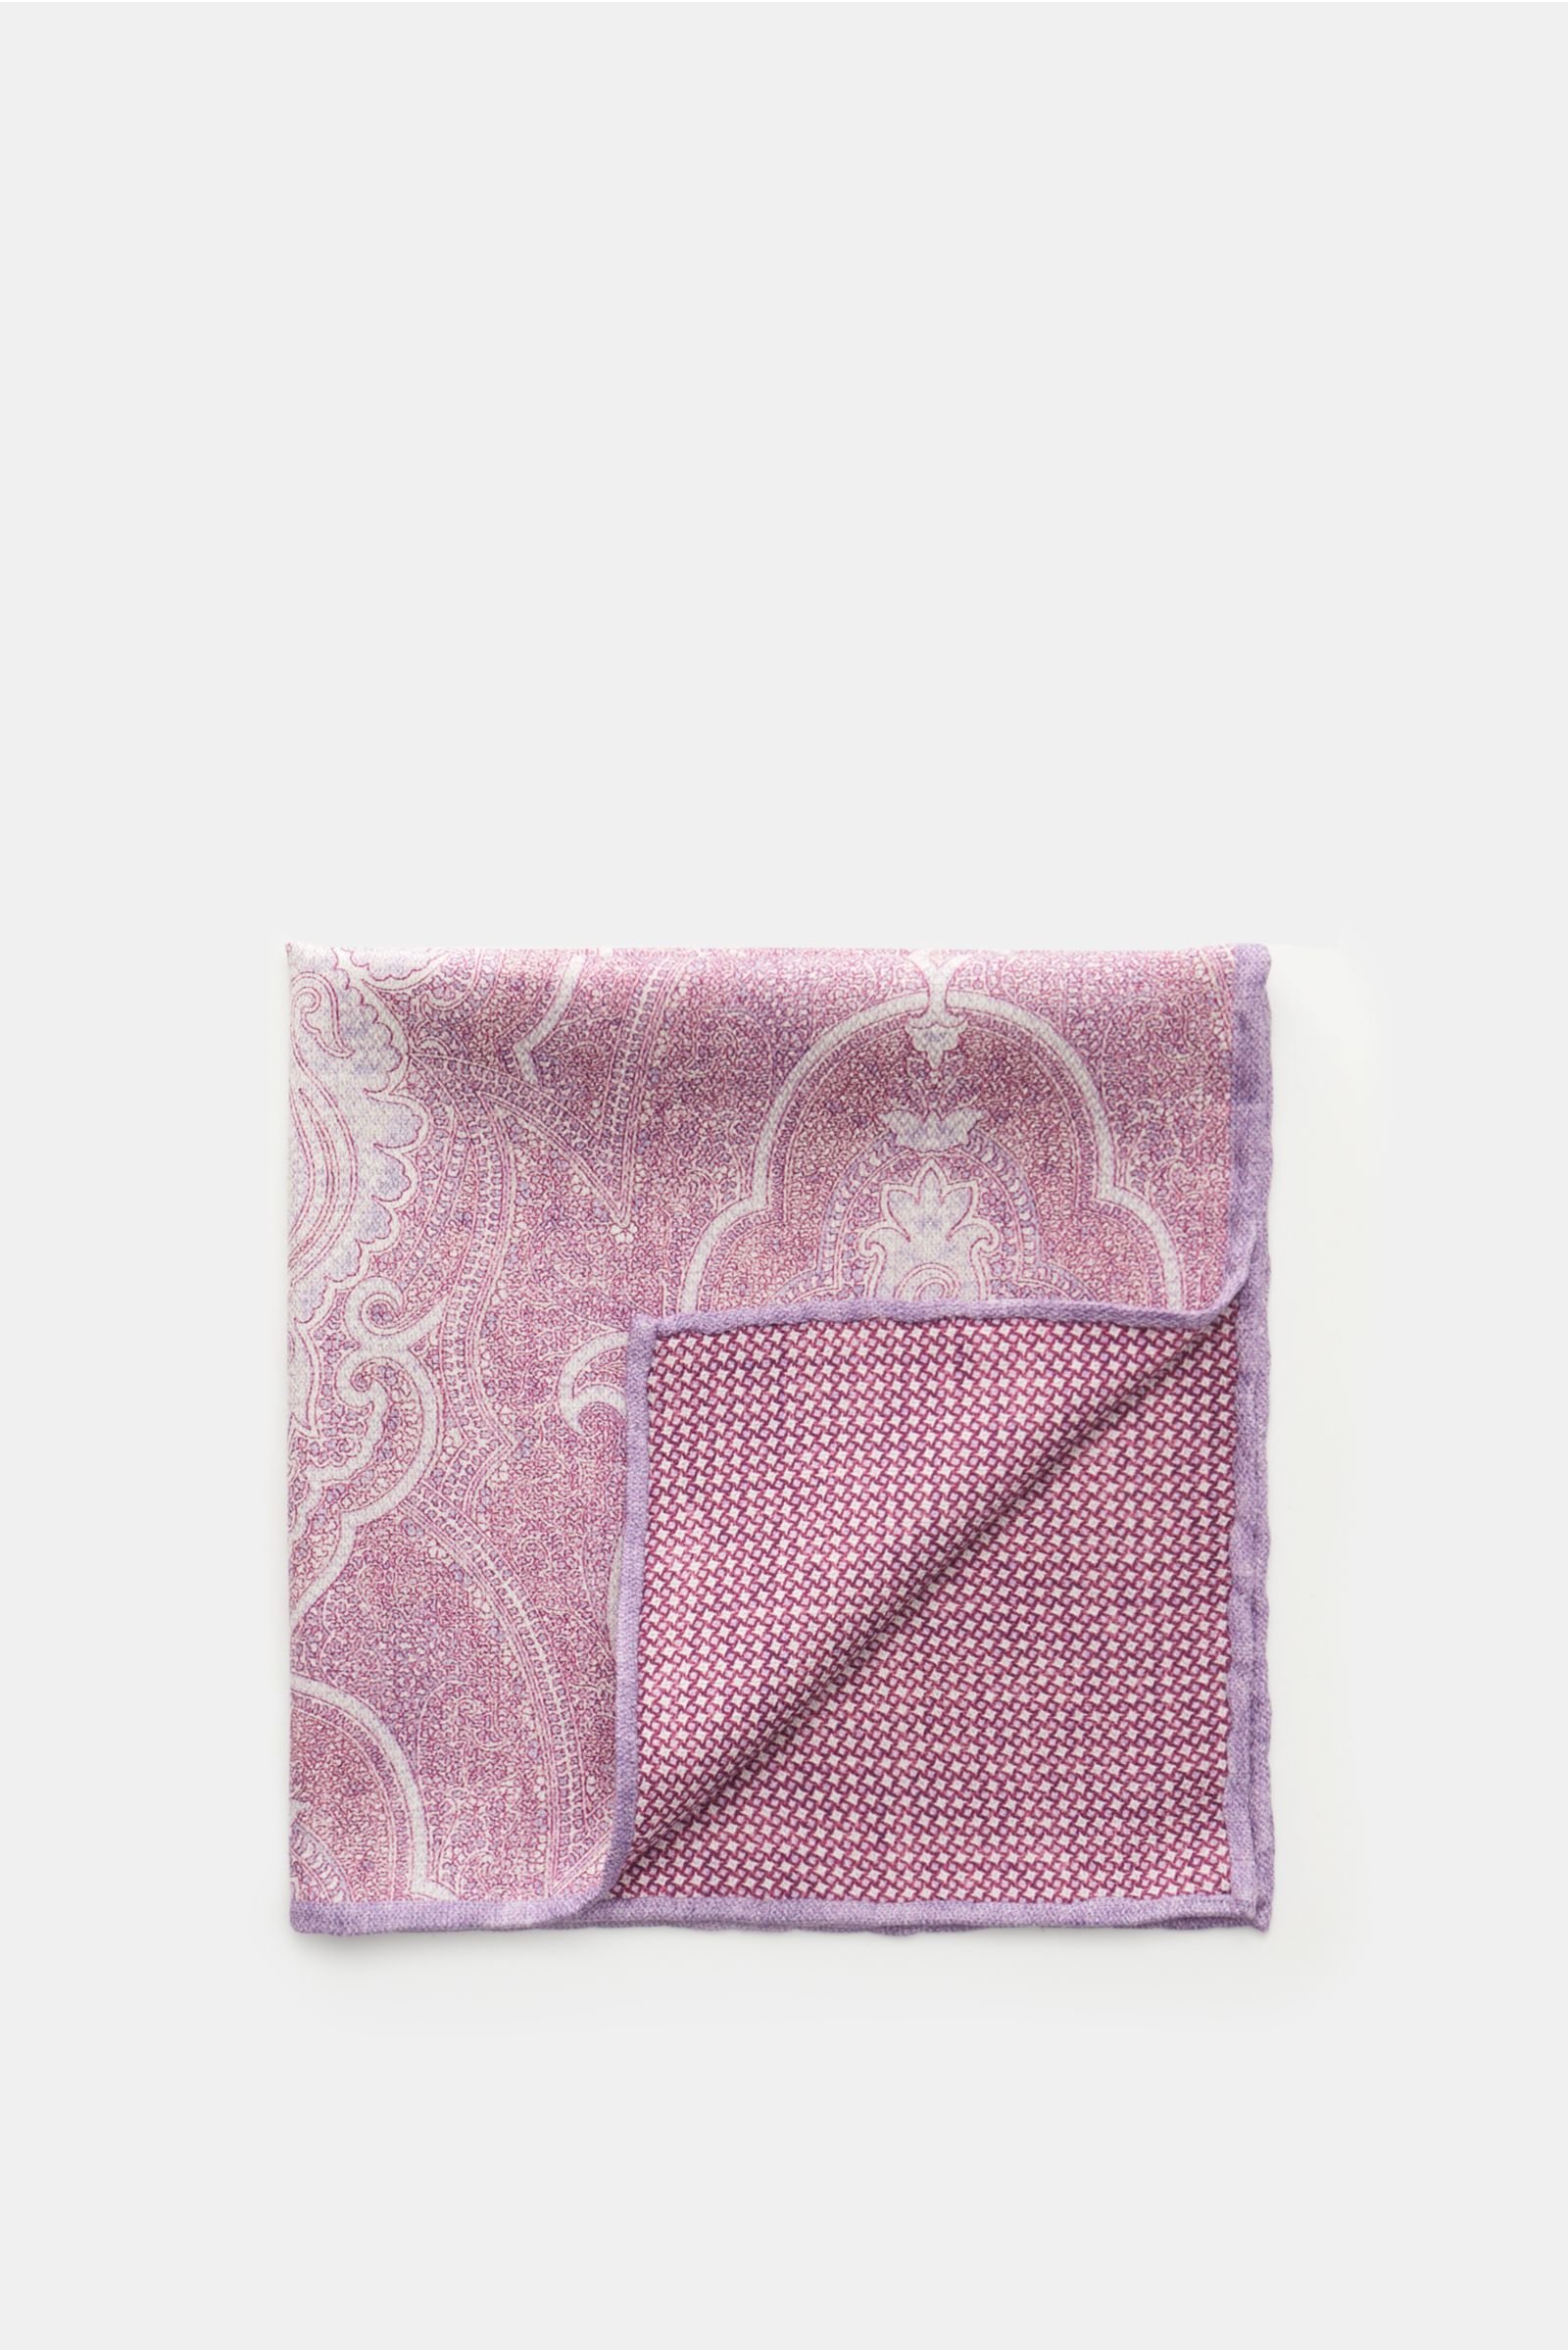 Silk pocket square lilac/off-white patterned